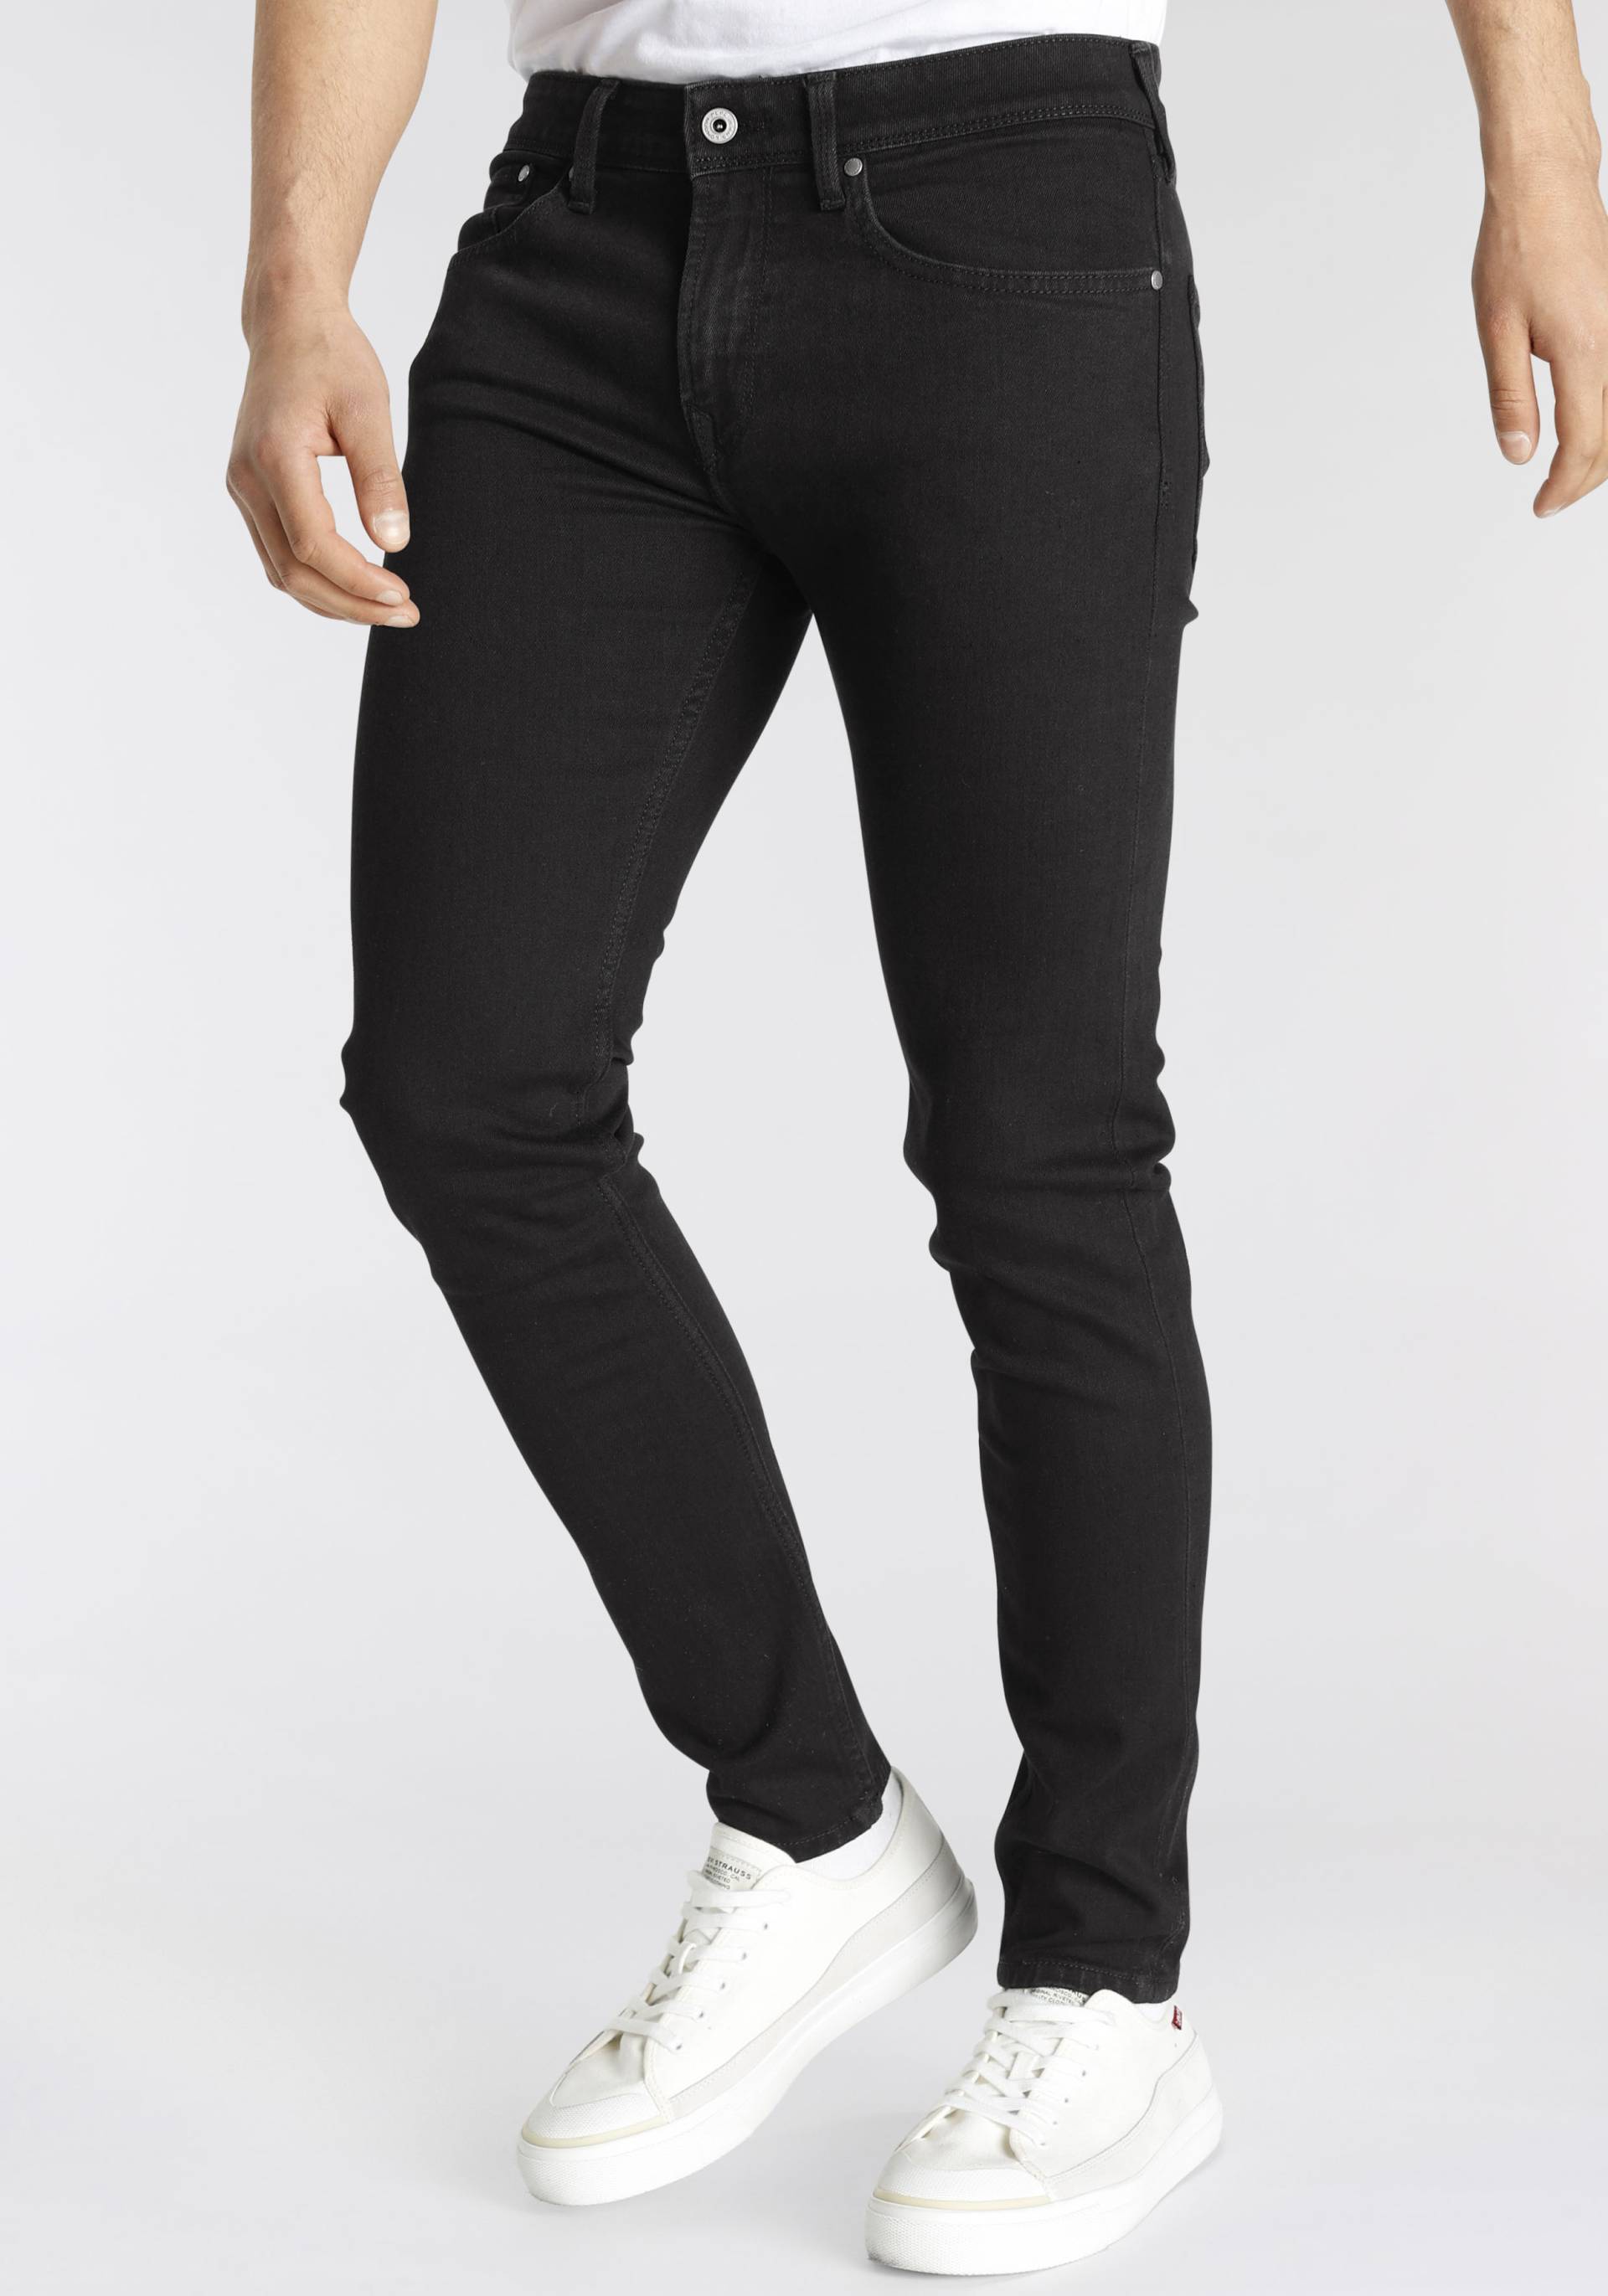 Pepe Jeans Skinny-fit-Jeans »Finsbury« von Pepe Jeans